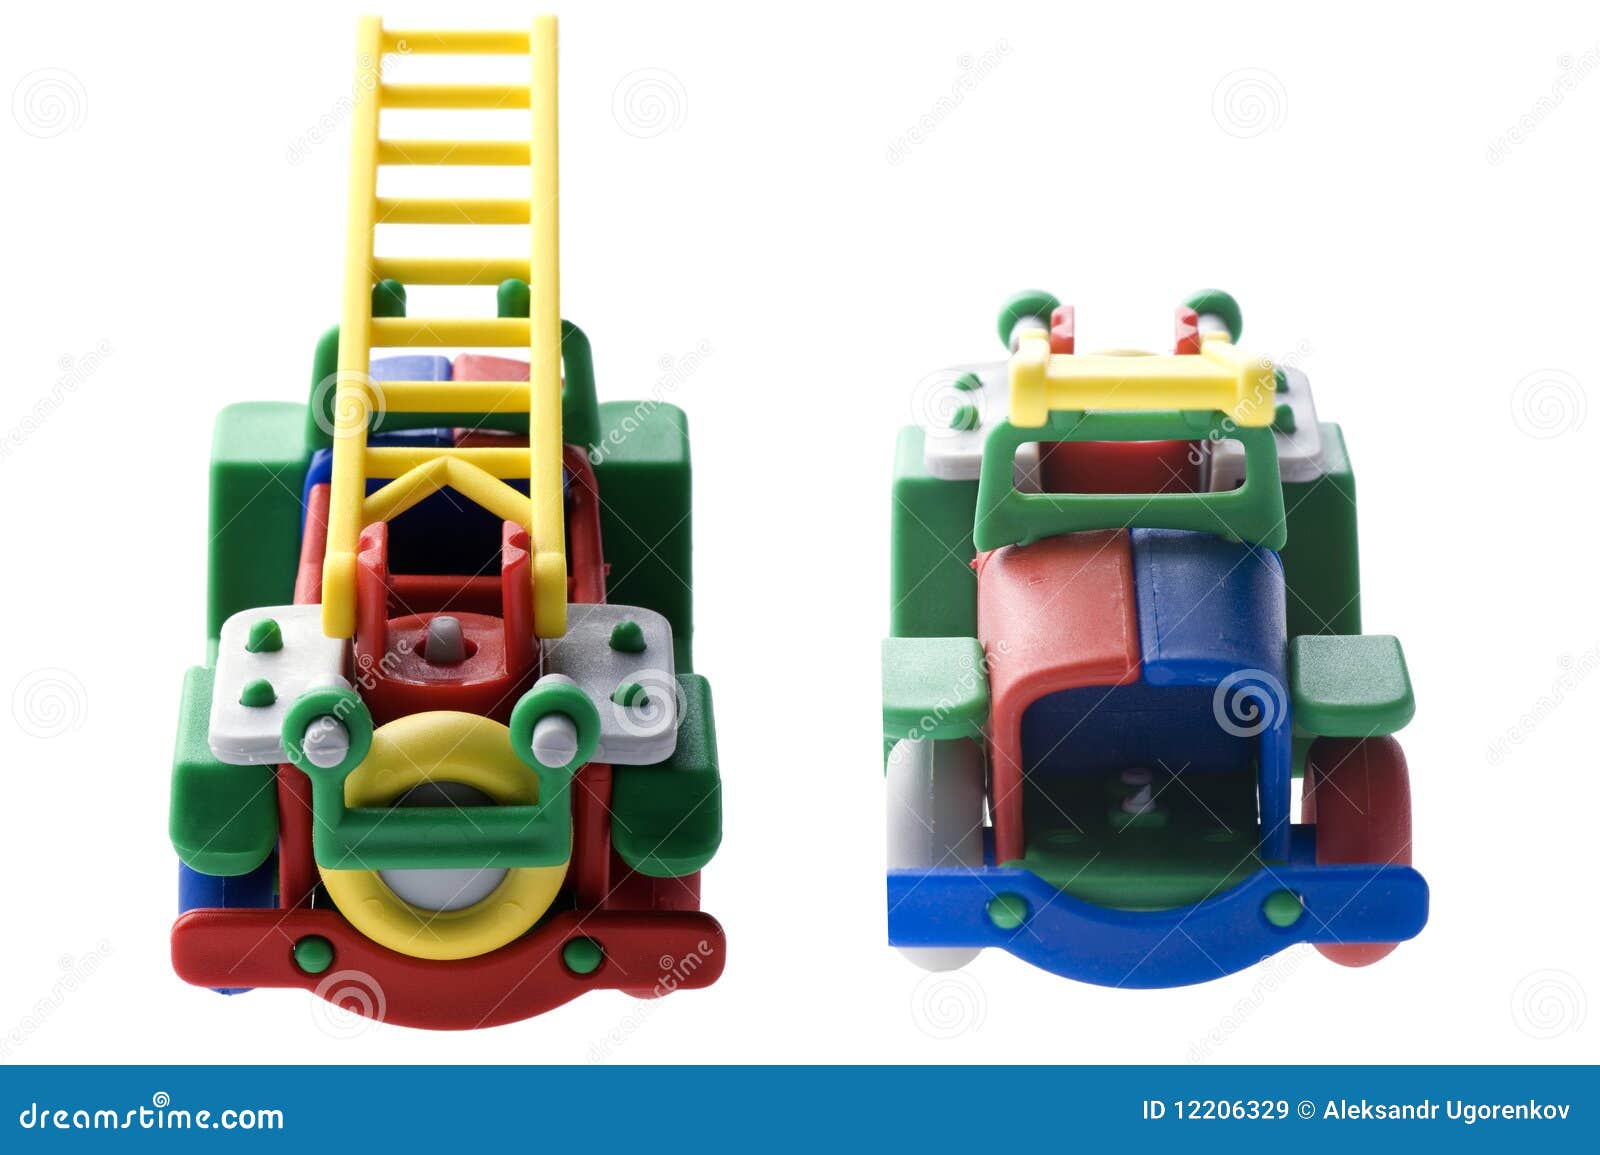 Royalty Free Stock Images: Toy Fire engine closeup